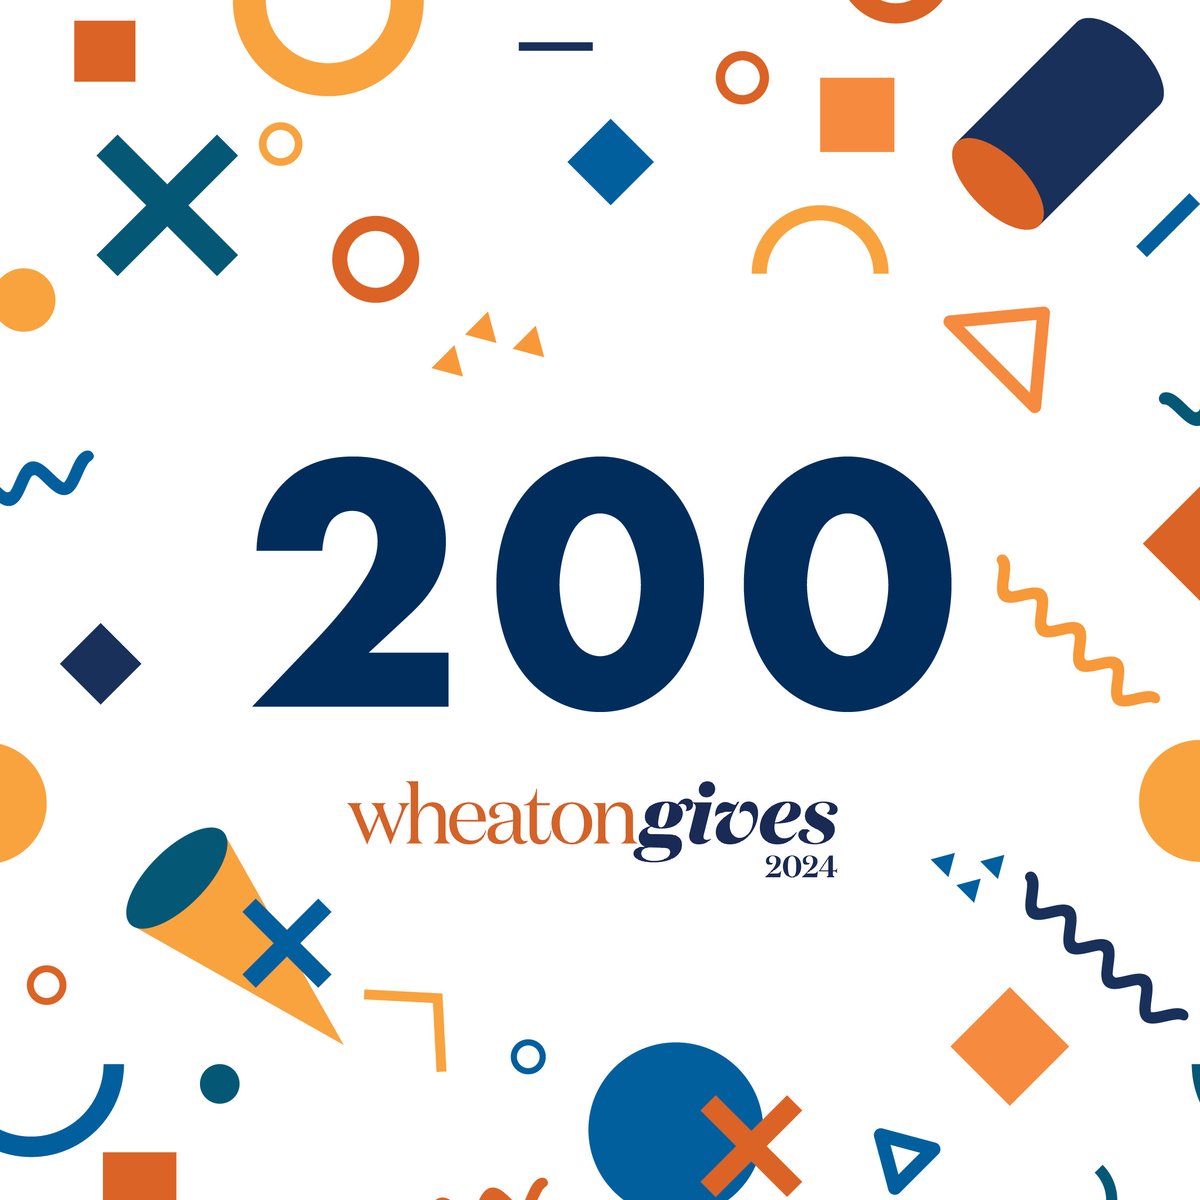 🎉 We reached 200 donors!! 🎉 Let's keep going! You can give at givingday.wheaton.edu #wheatongives